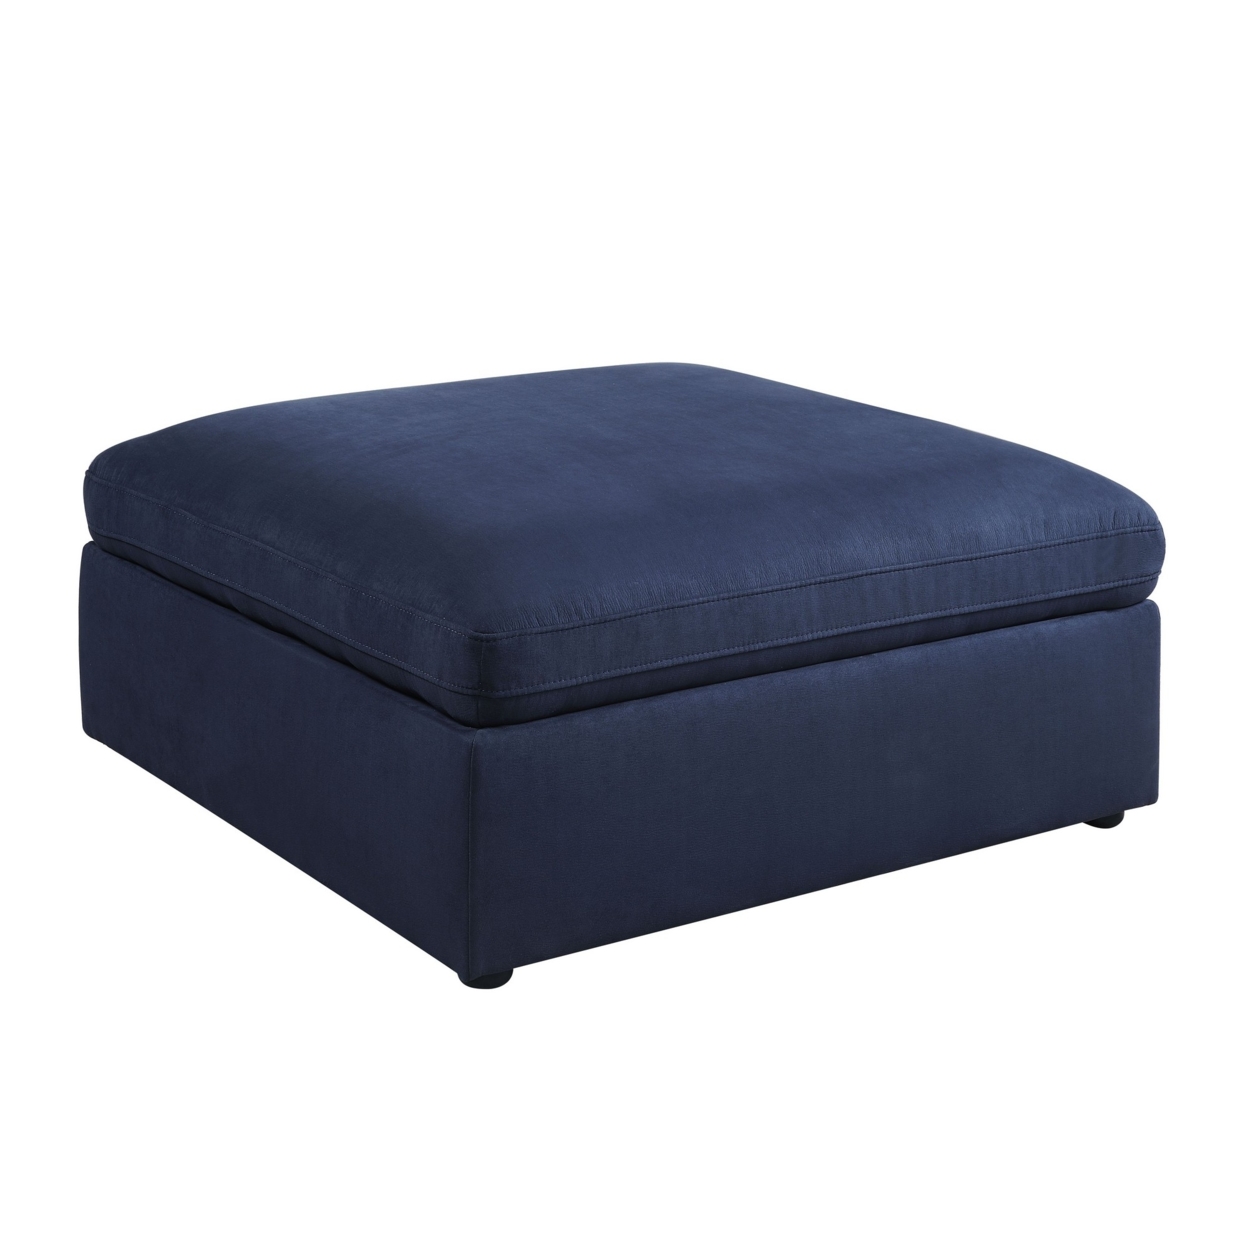 Ottoman With Fabric Seat And Stitched Details, Blue- Saltoro Sherpi